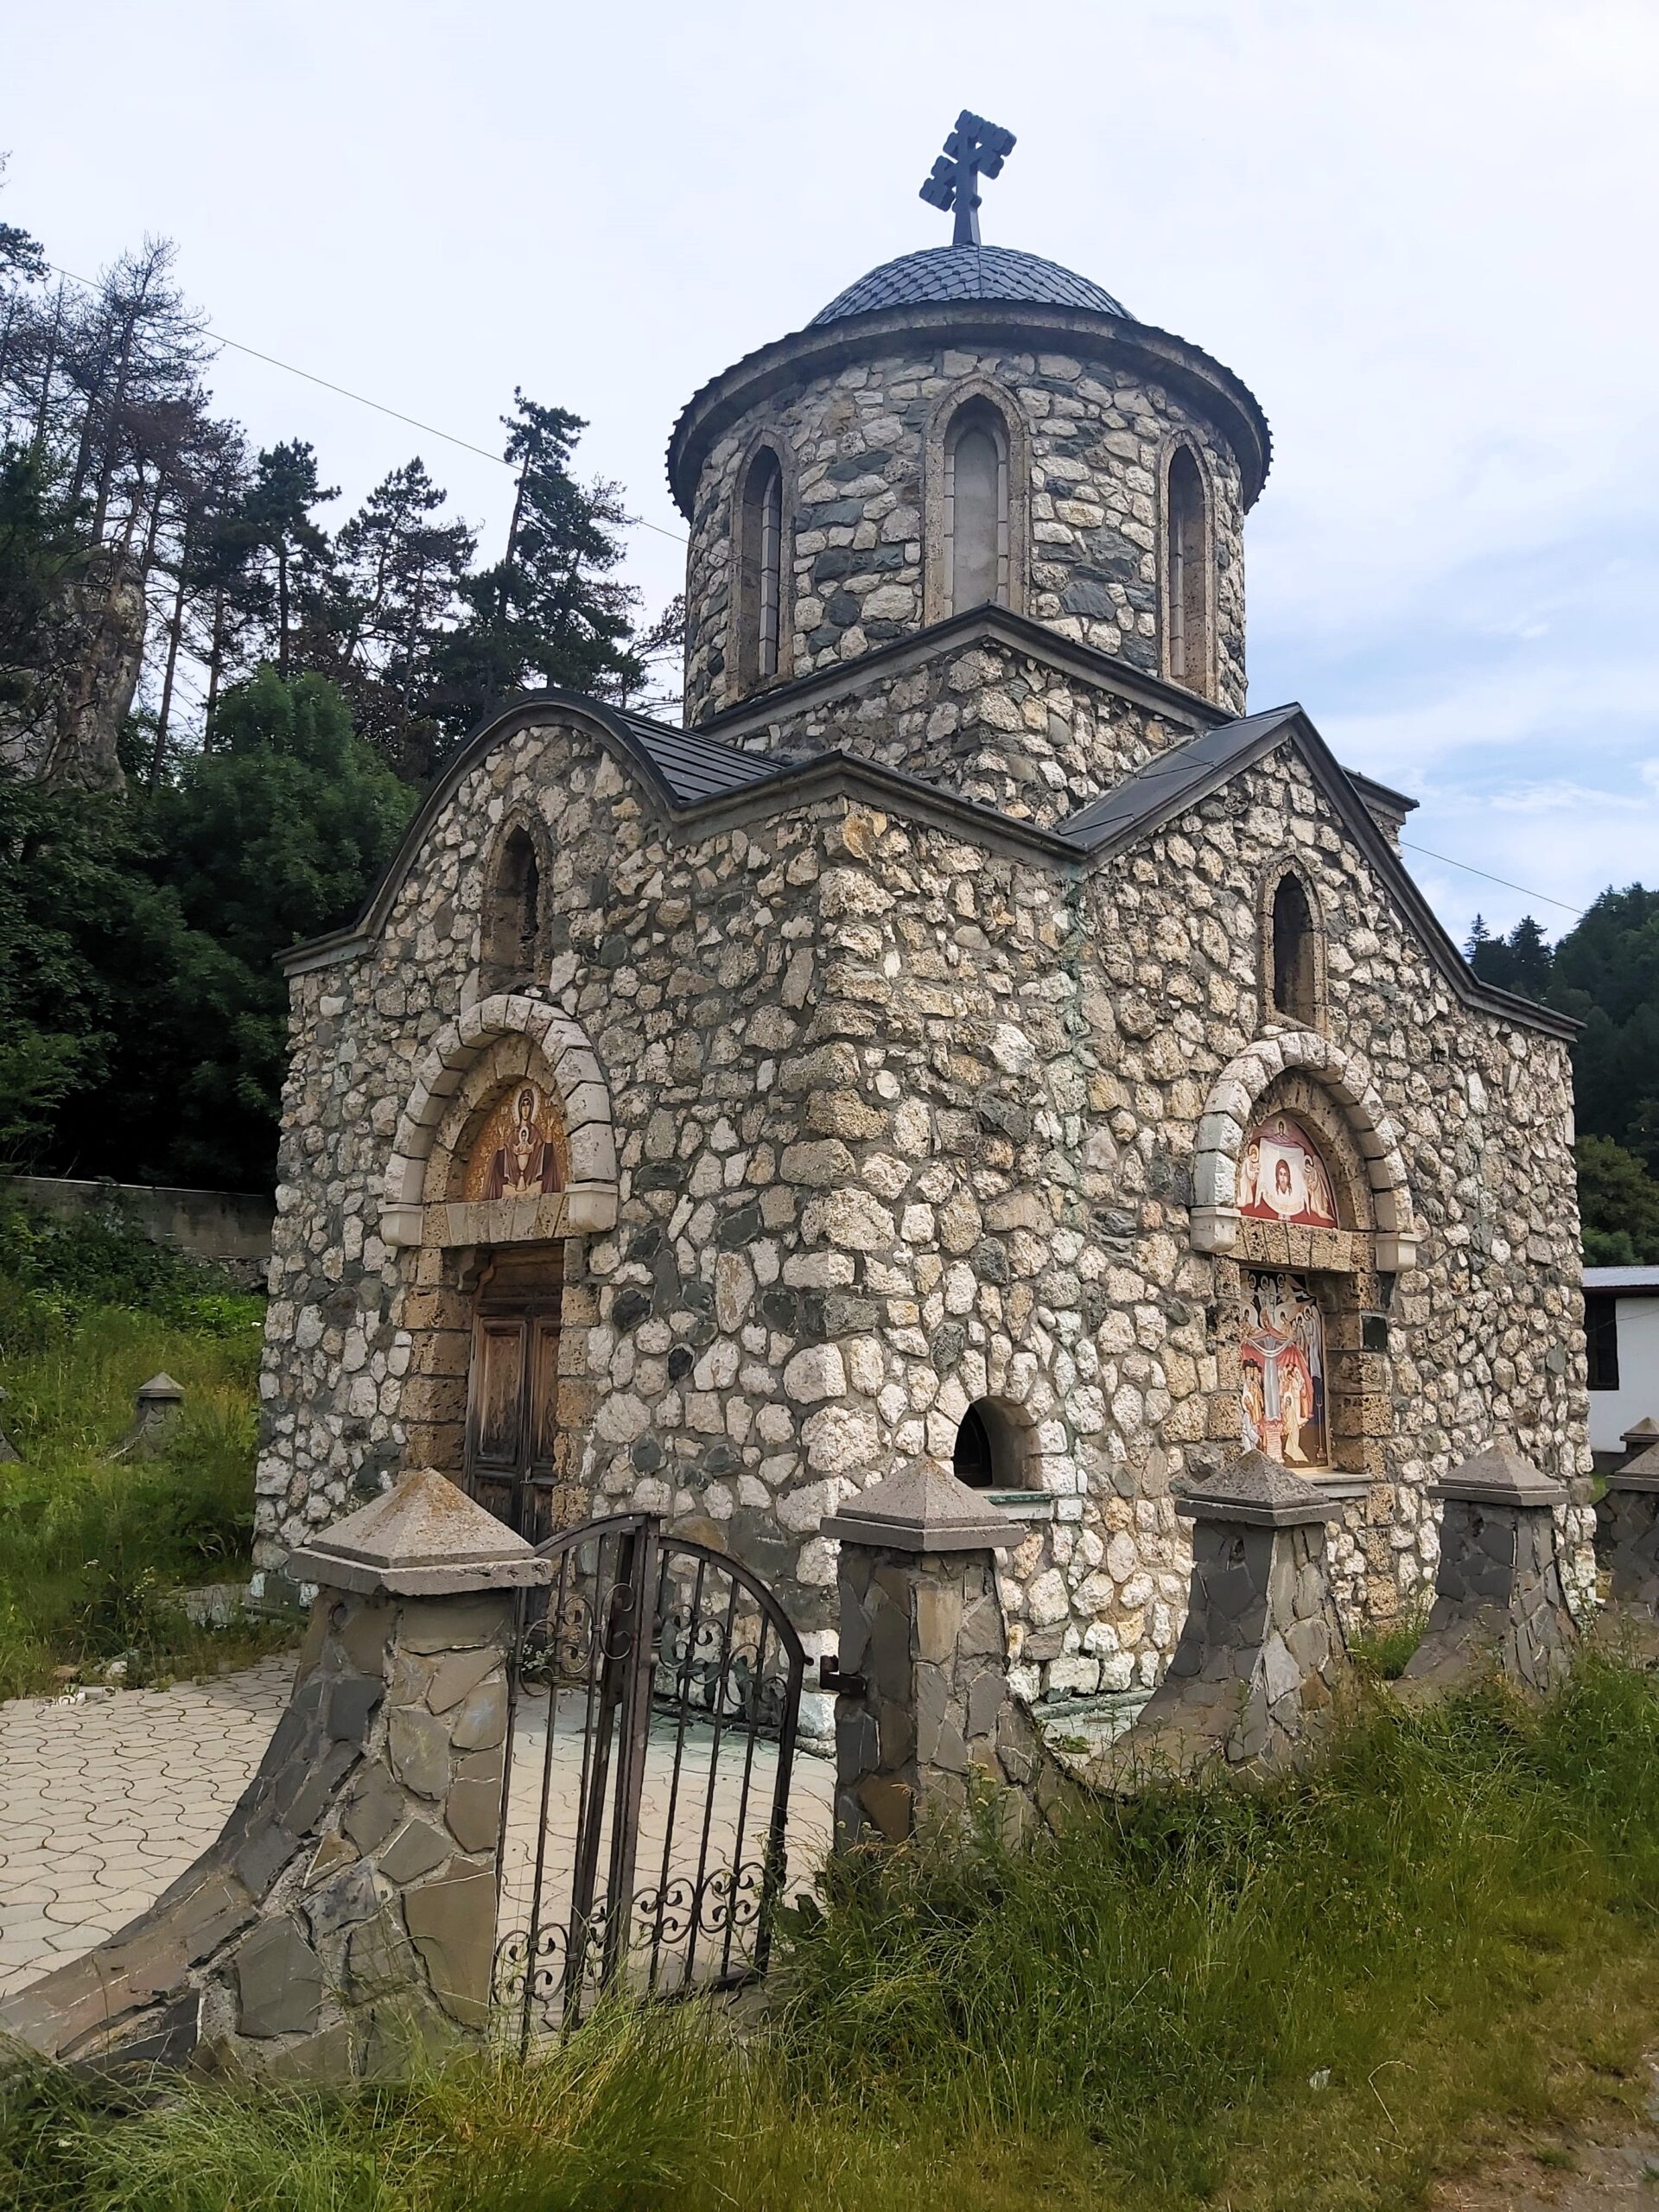 A small church with murals painted on in Bran, Romania